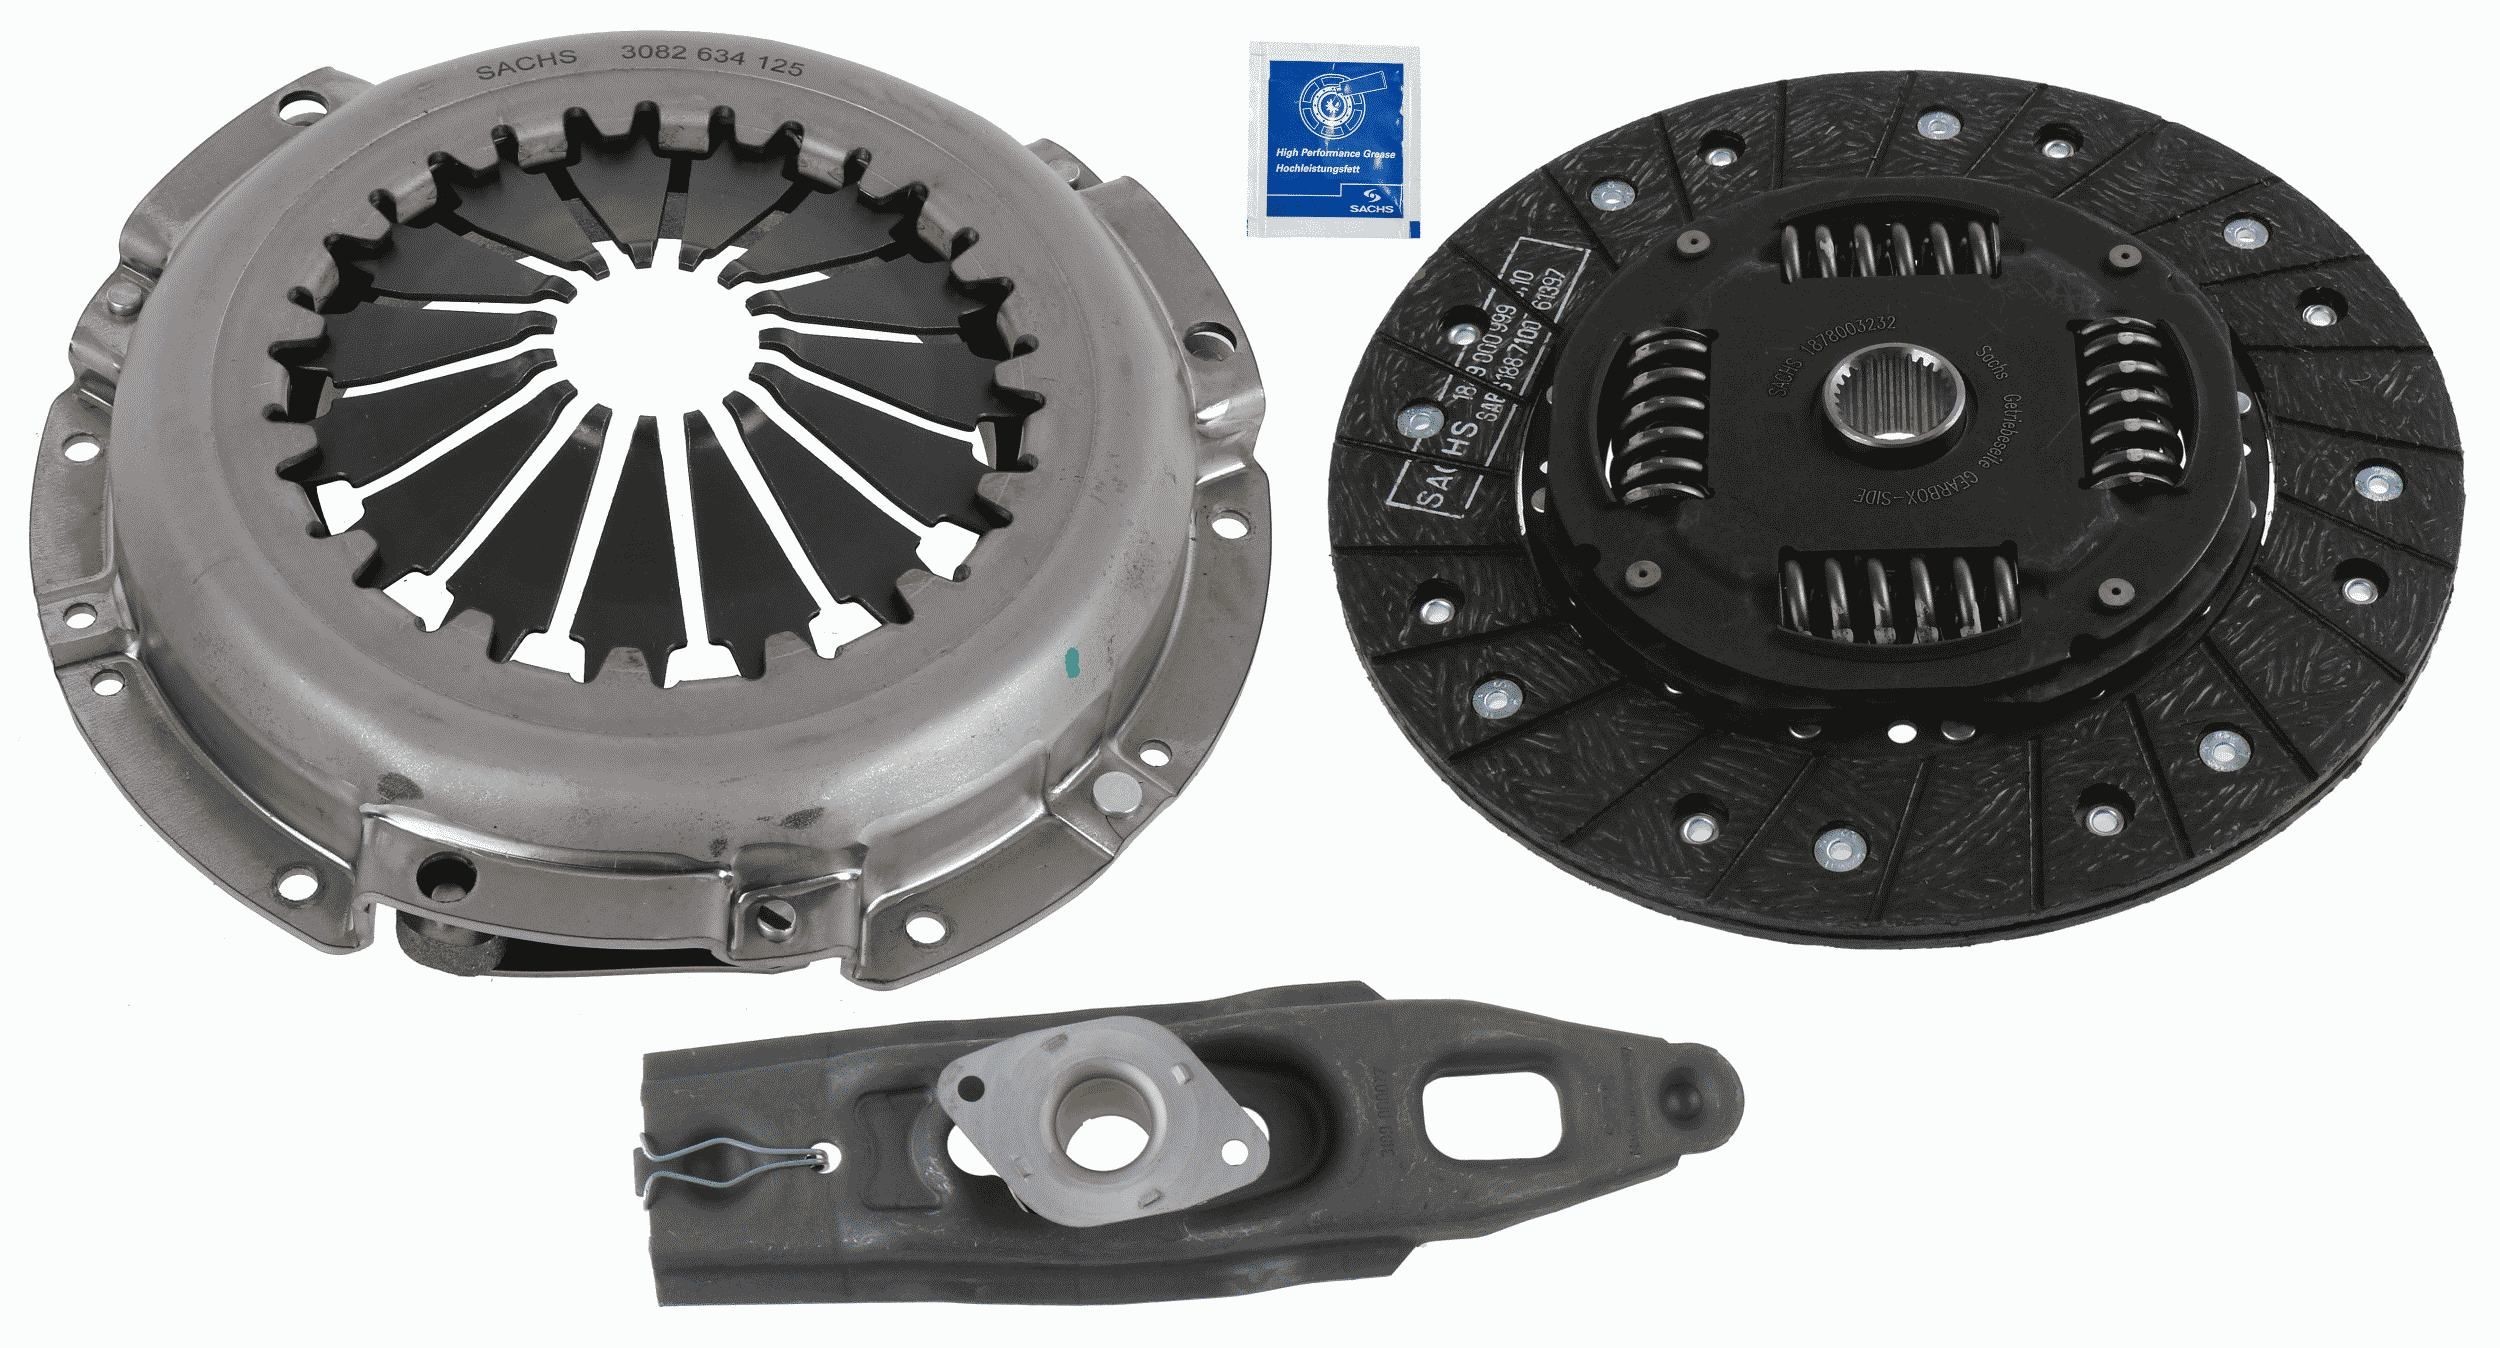 Smart Clutch kit SACHS 3000 951 043 at a good price